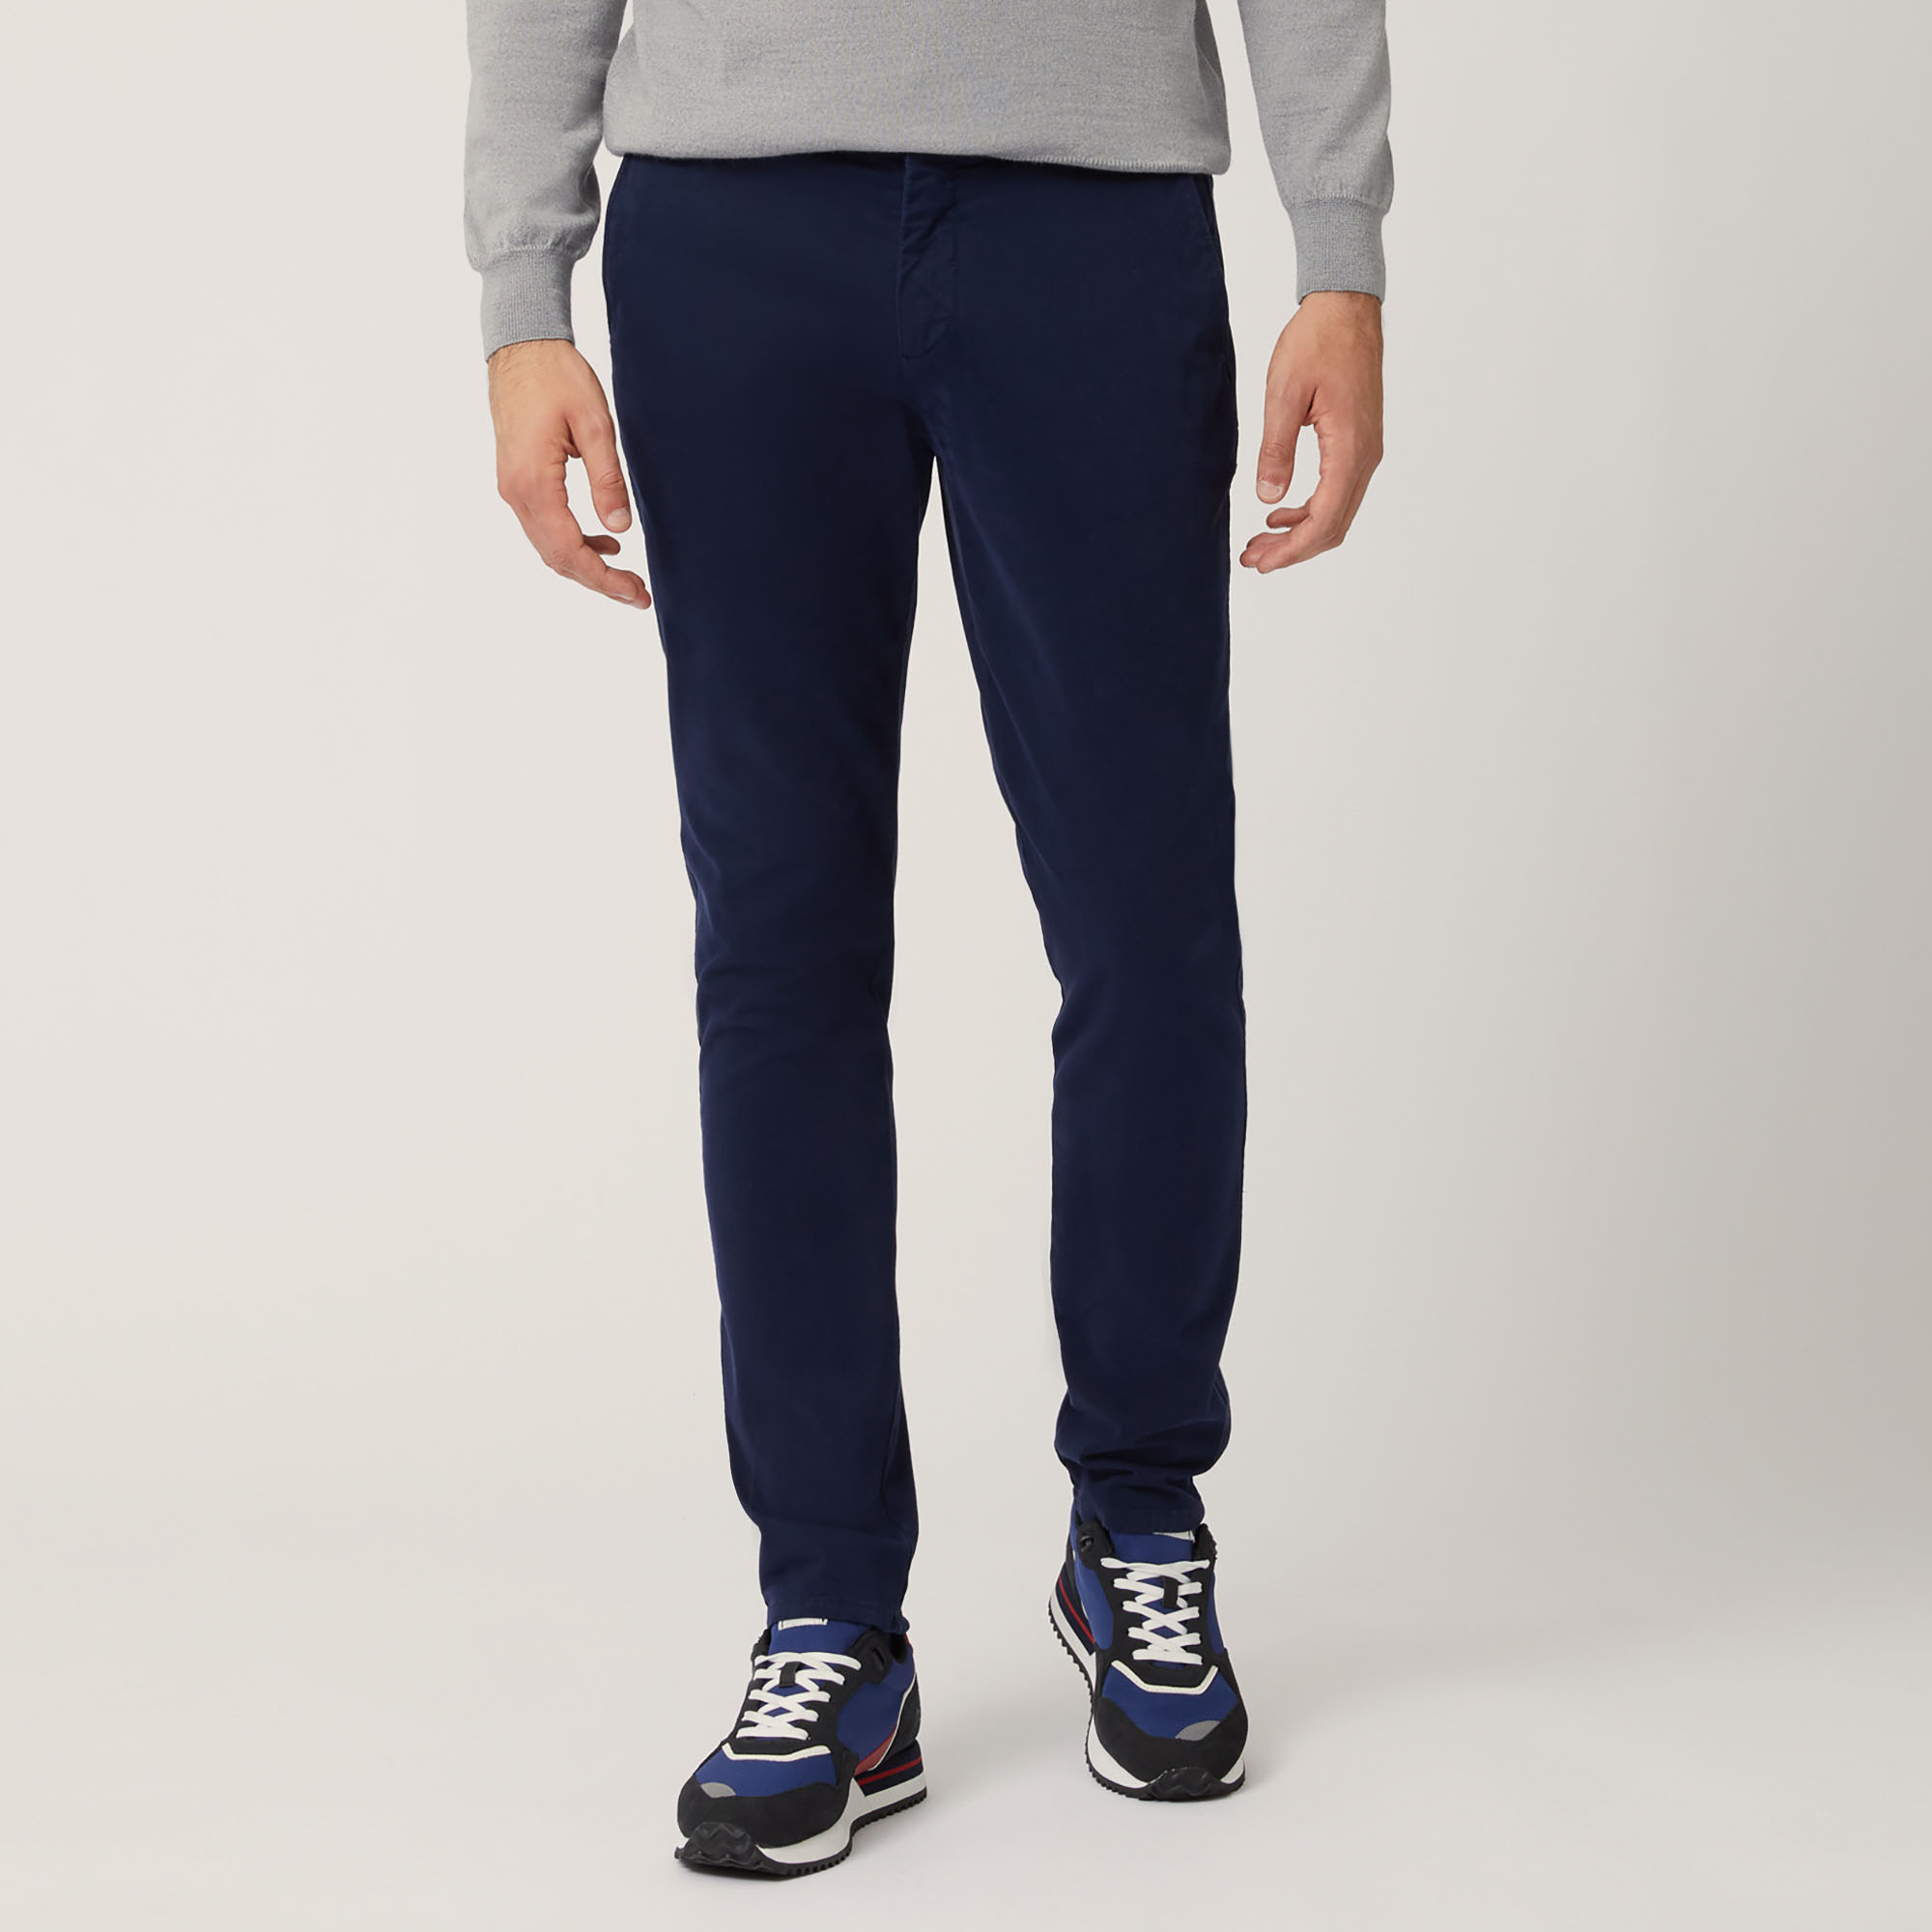 Elevate Dutility Narrow-Fit Chinos, Blue, large